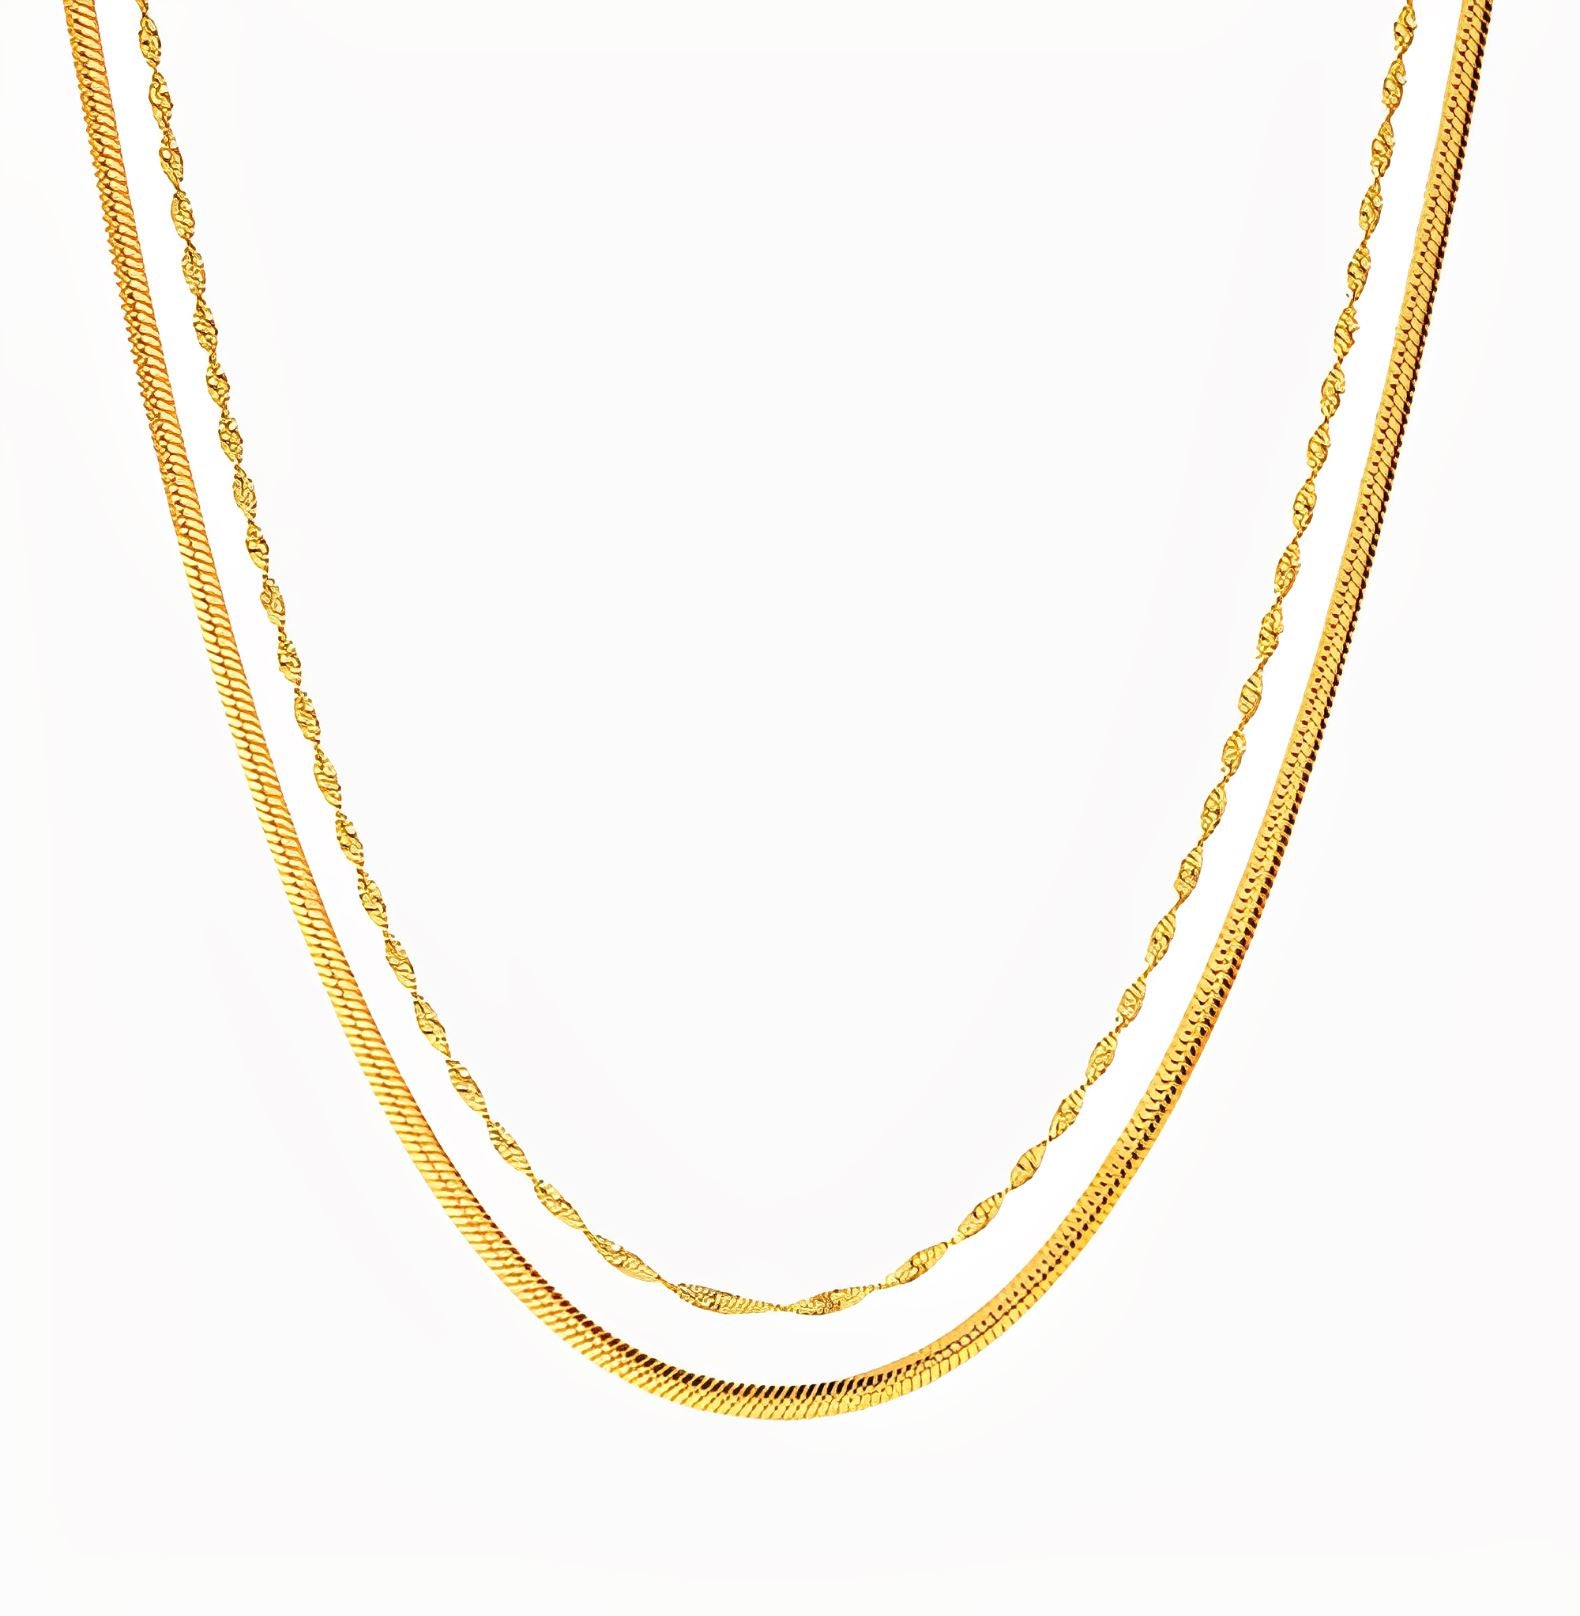 DOUBLE CHAIN NECKLACE braclet Yubama Jewelry Online Store - The Elegant Designs of Gold and Silver ! 